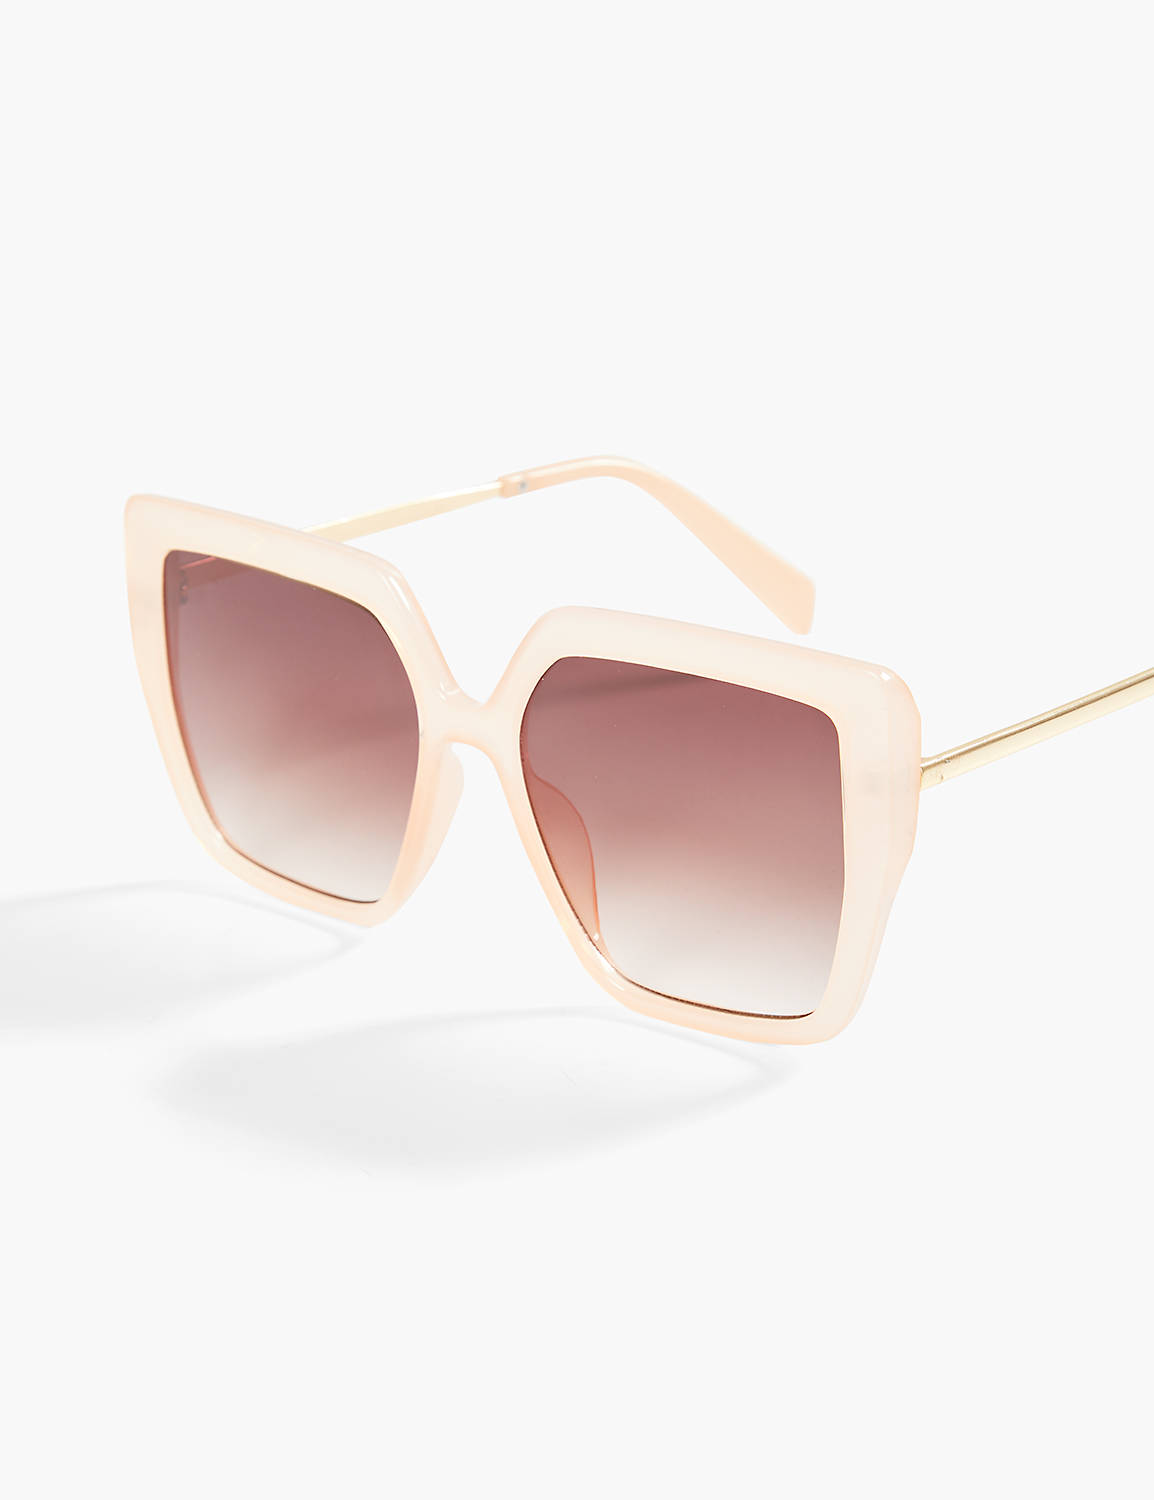 Oversized Butterfly Sunglass Product Image 1